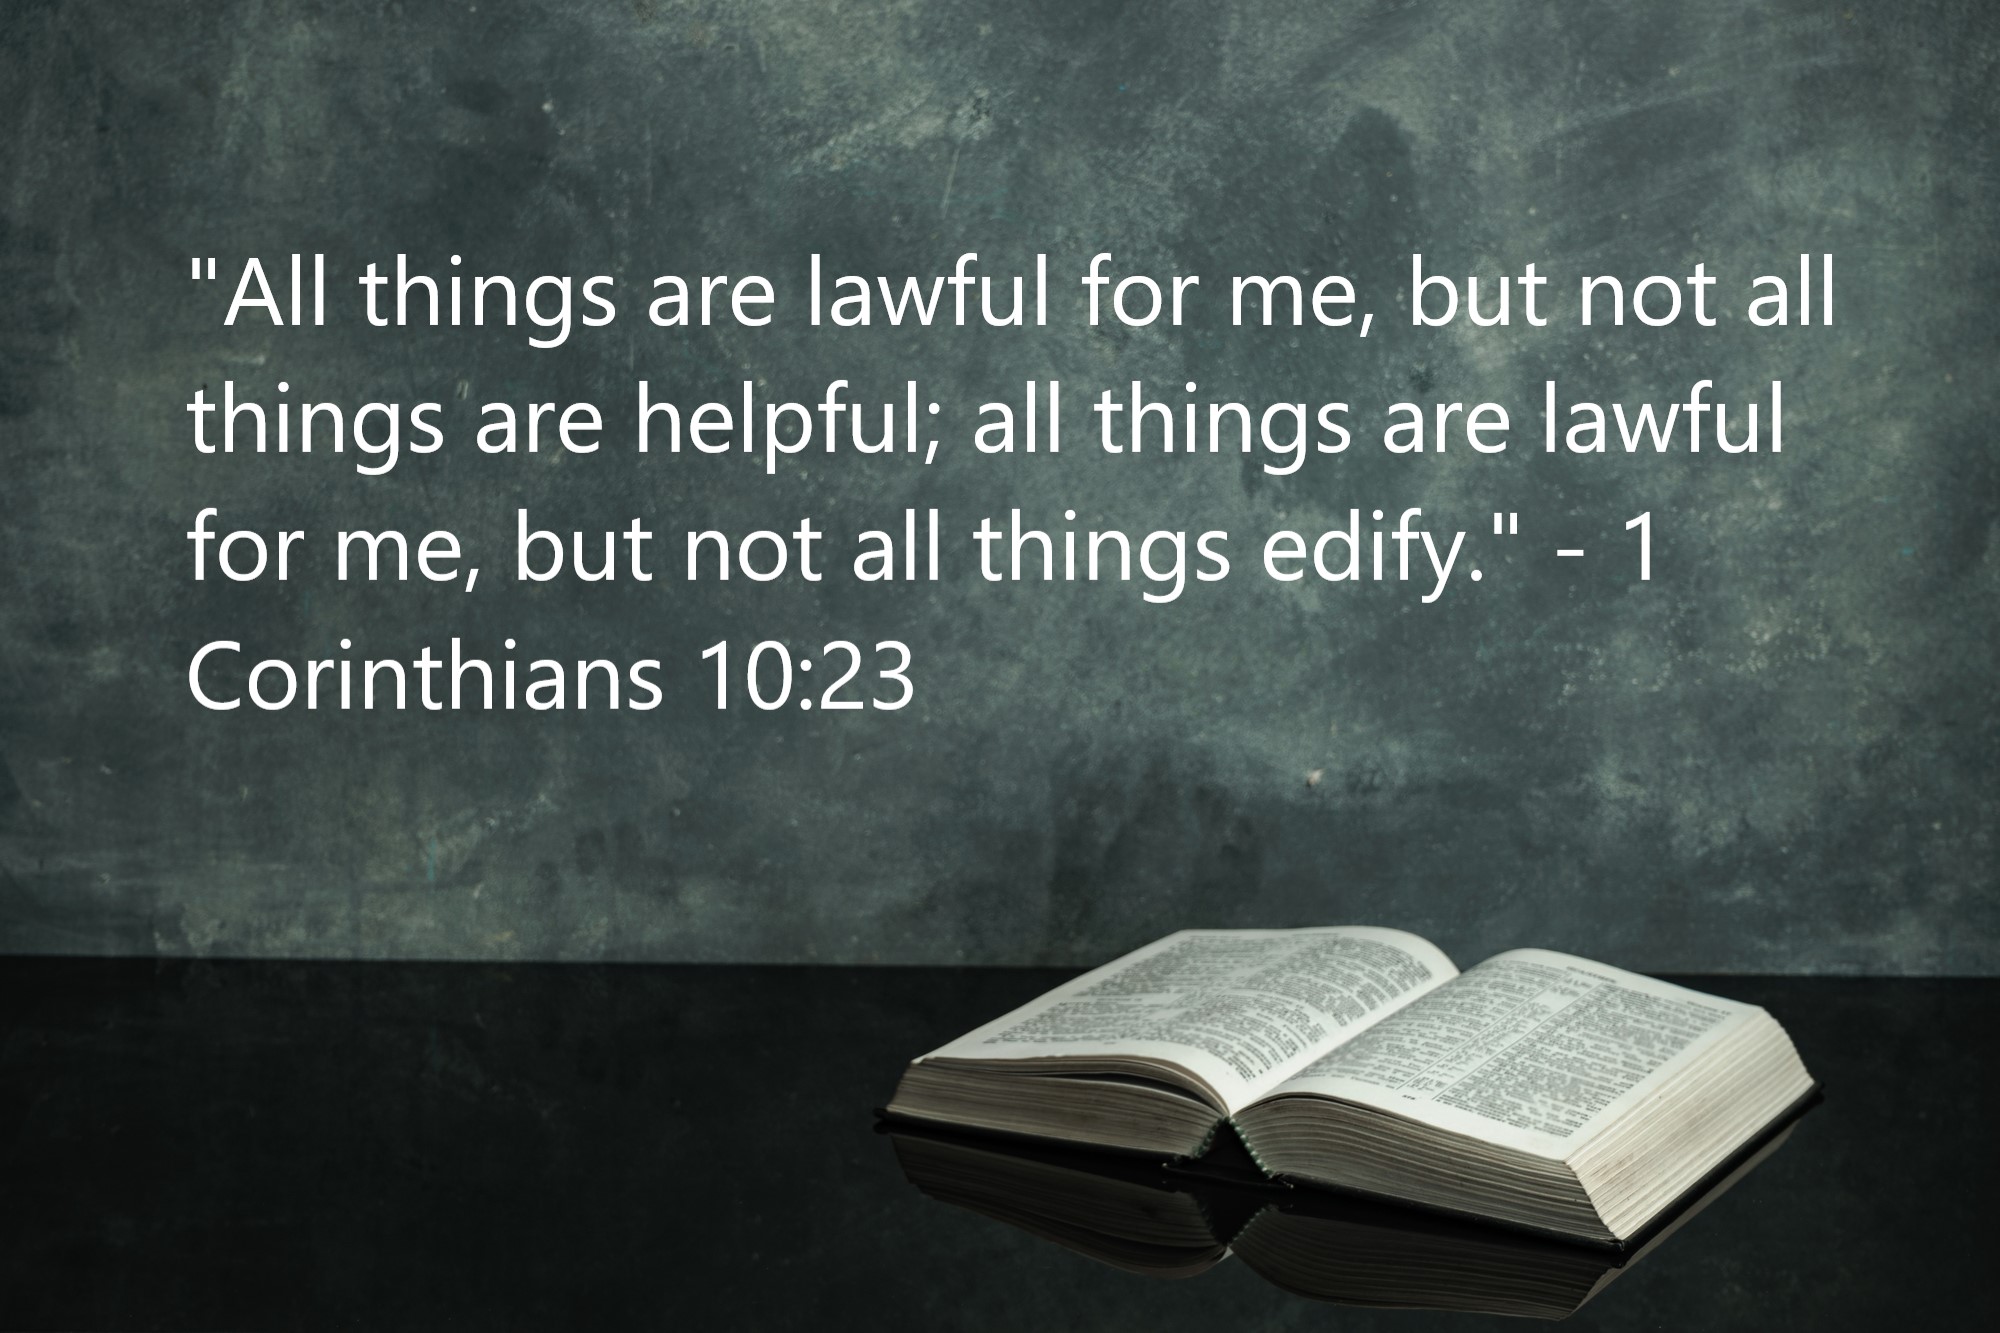 "All things are lawful for me, but not all things are helpful; all things are lawful for me, but not all things edify." - 1 Corinthians 10:23